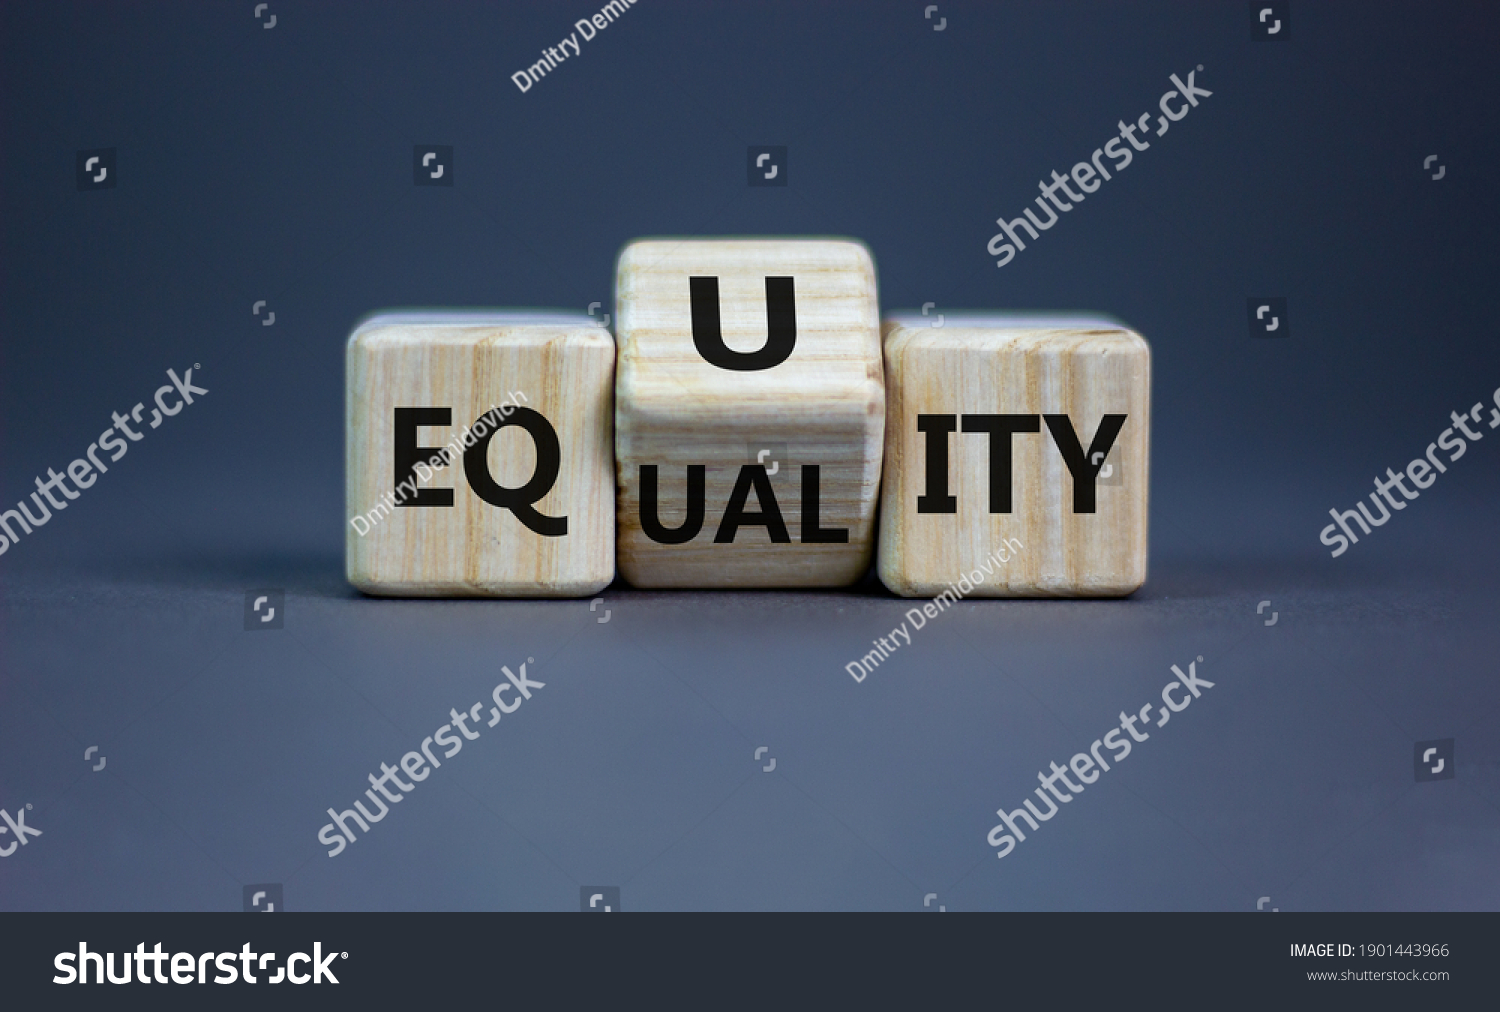 Equality or equity symbol. Turned a cube and changed the word 'equality' to 'equity'. Beautiful grey background. Psychology, business and equality or equity concept. Copy space. #1901443966